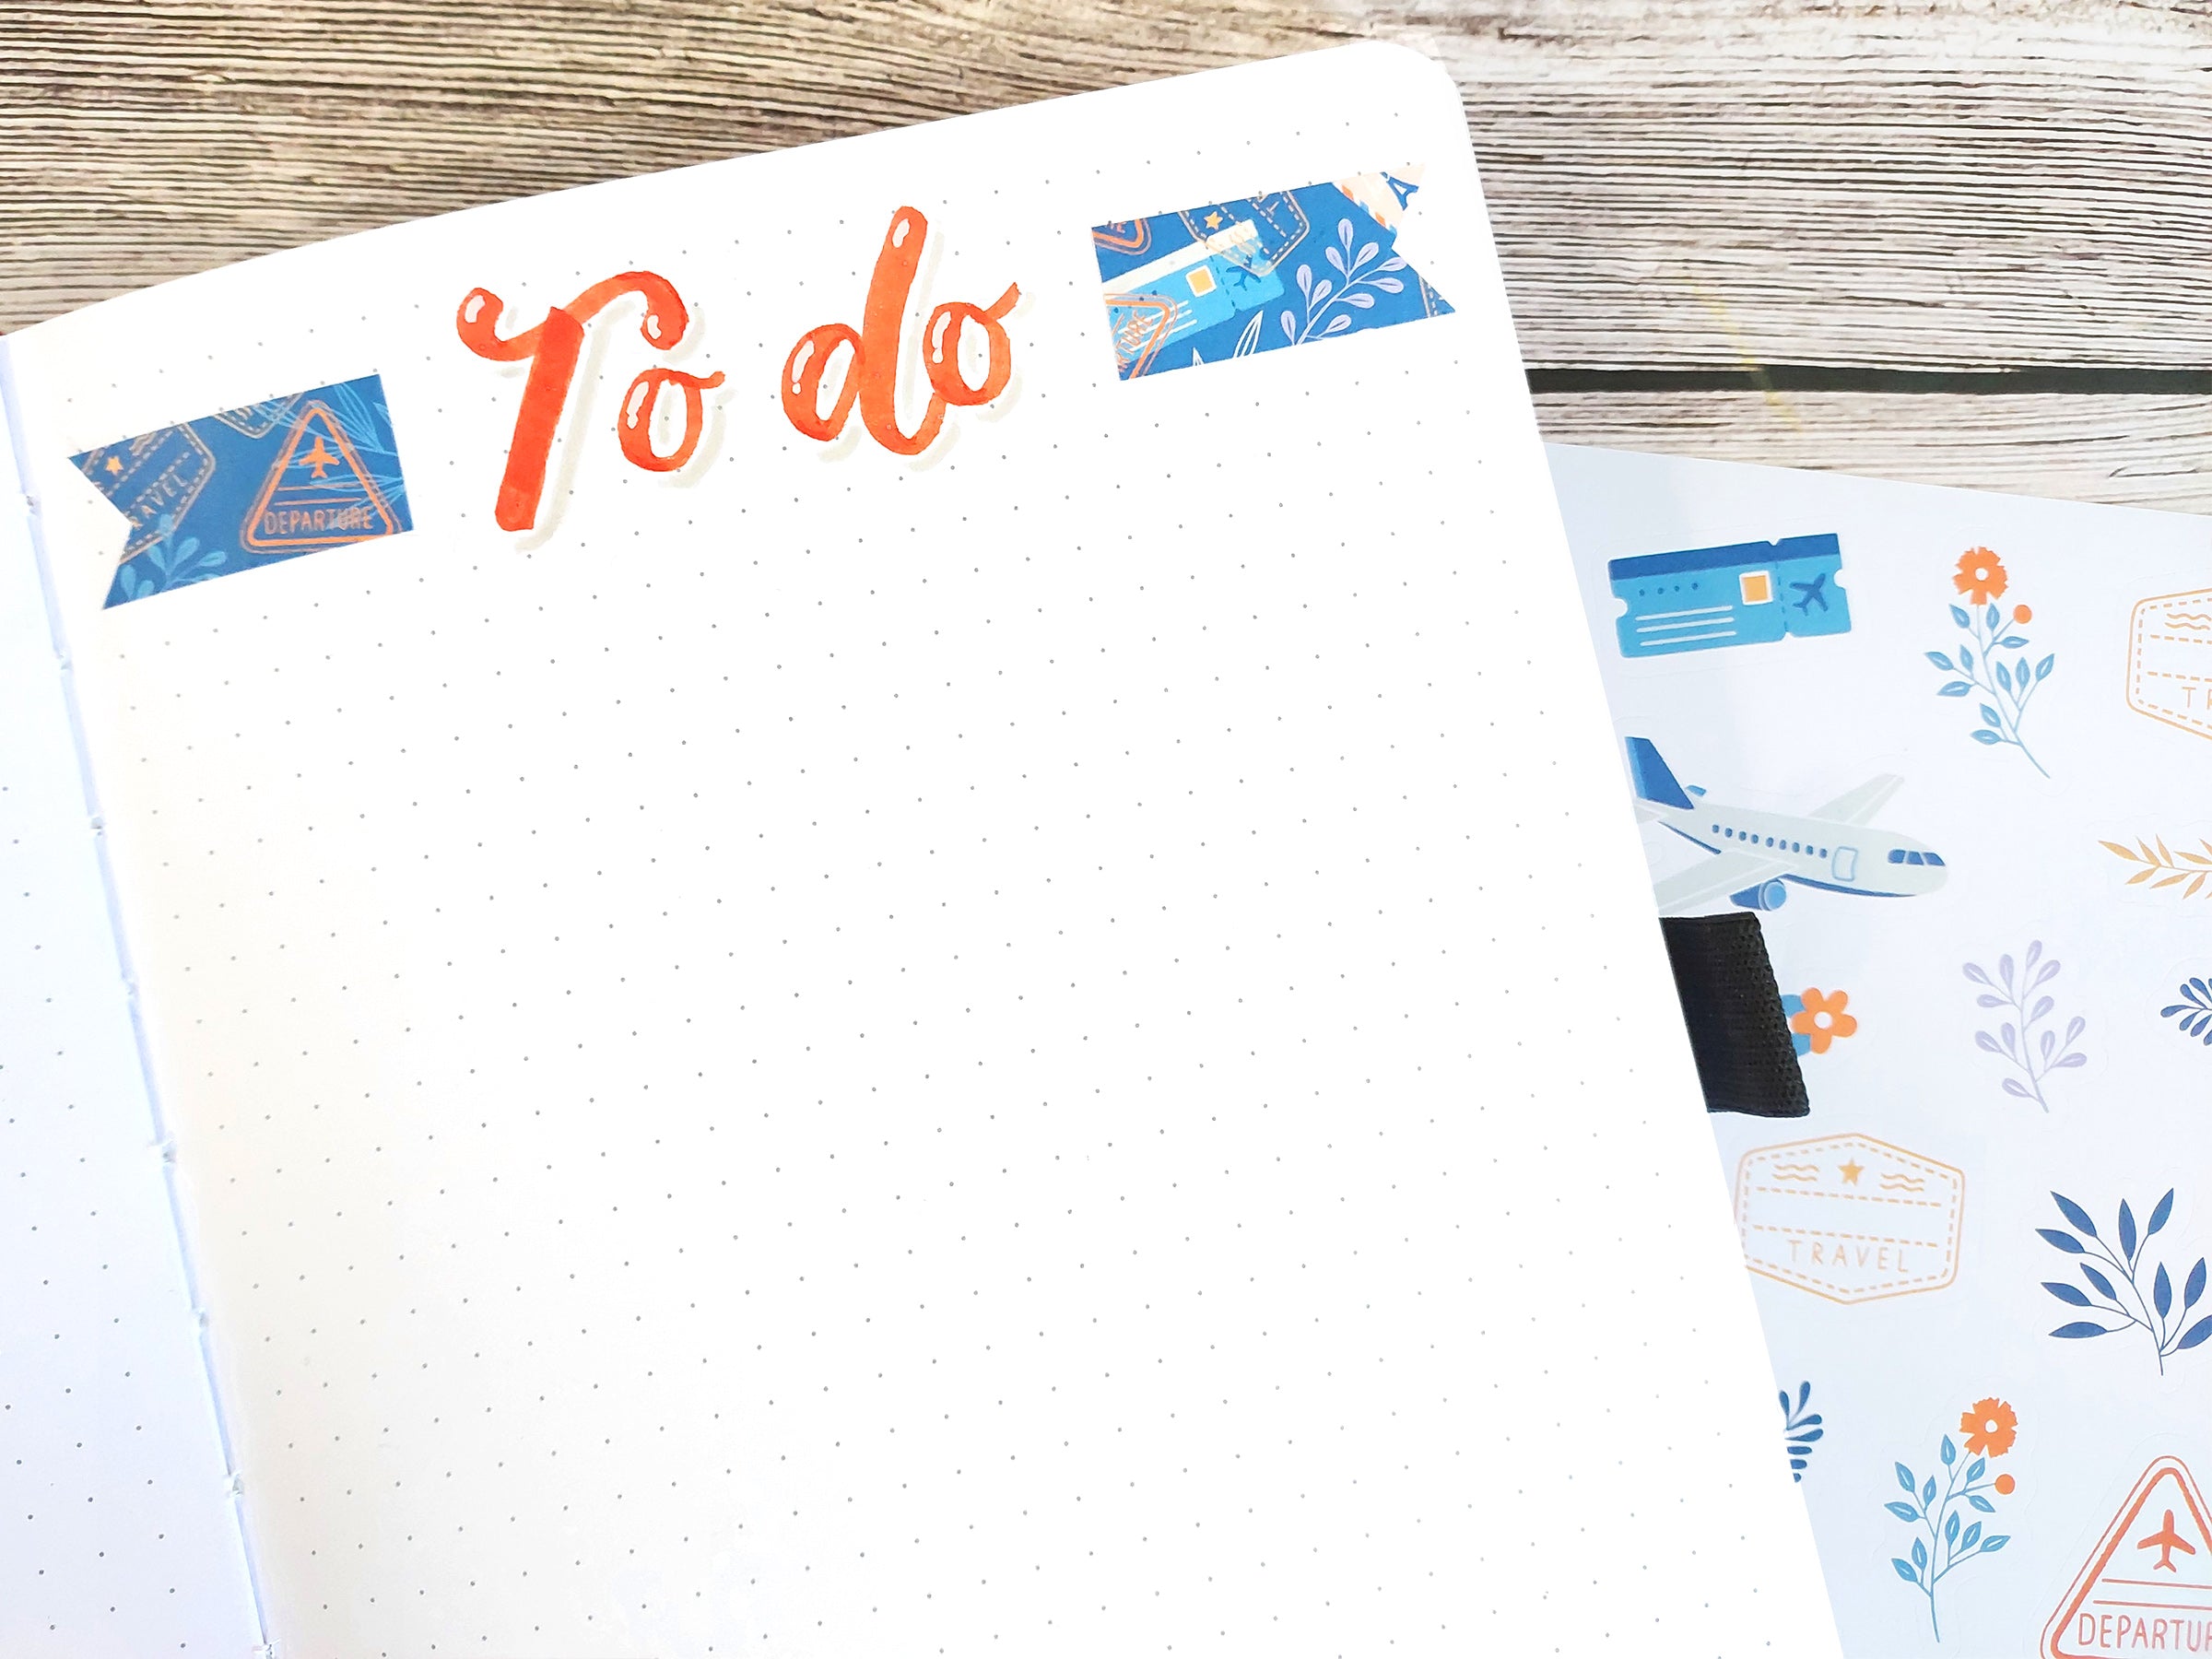 How To Plan Your Social Media Content In Your Bullet Journal